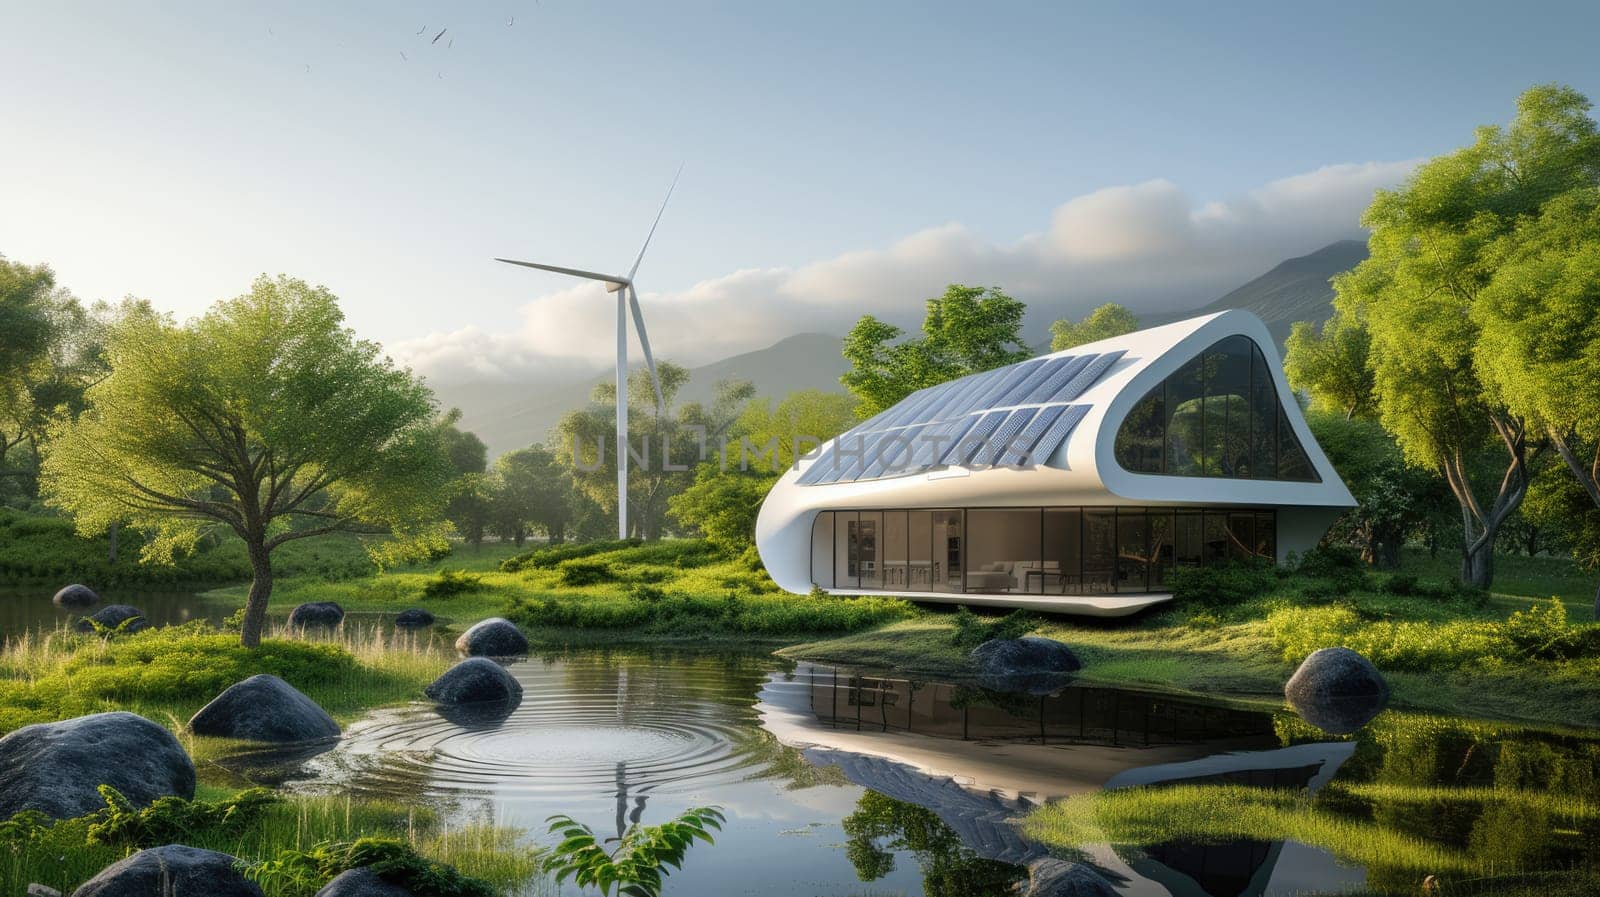 Green house with eco-friendly energy in natural landscape AIG41 by biancoblue